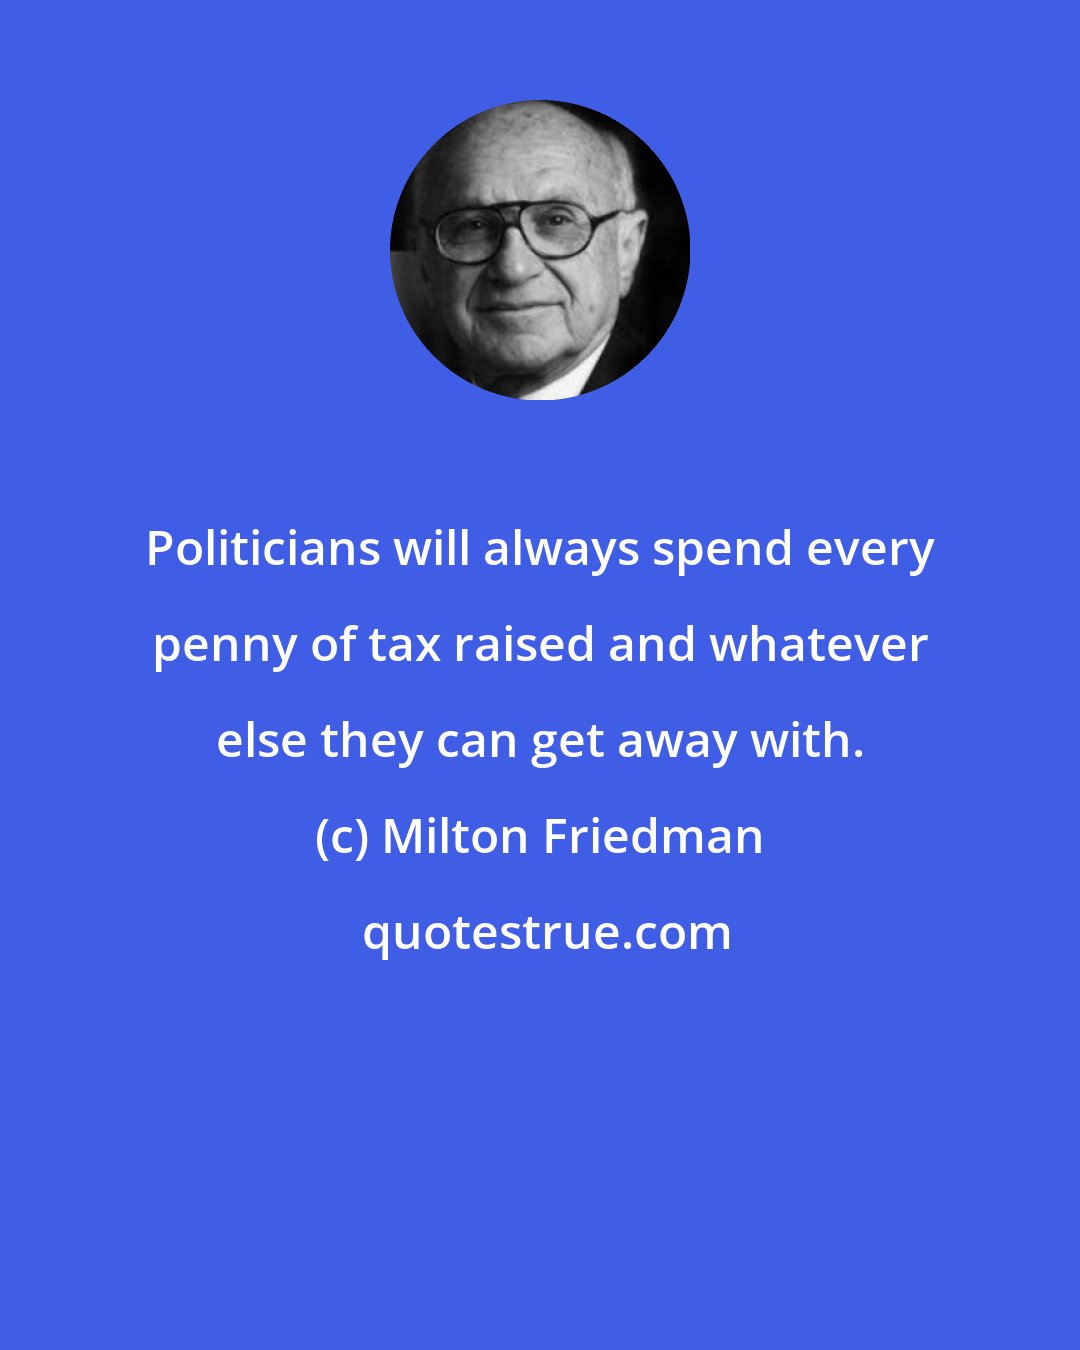 Milton Friedman: Politicians will always spend every penny of tax raised and whatever else they can get away with.